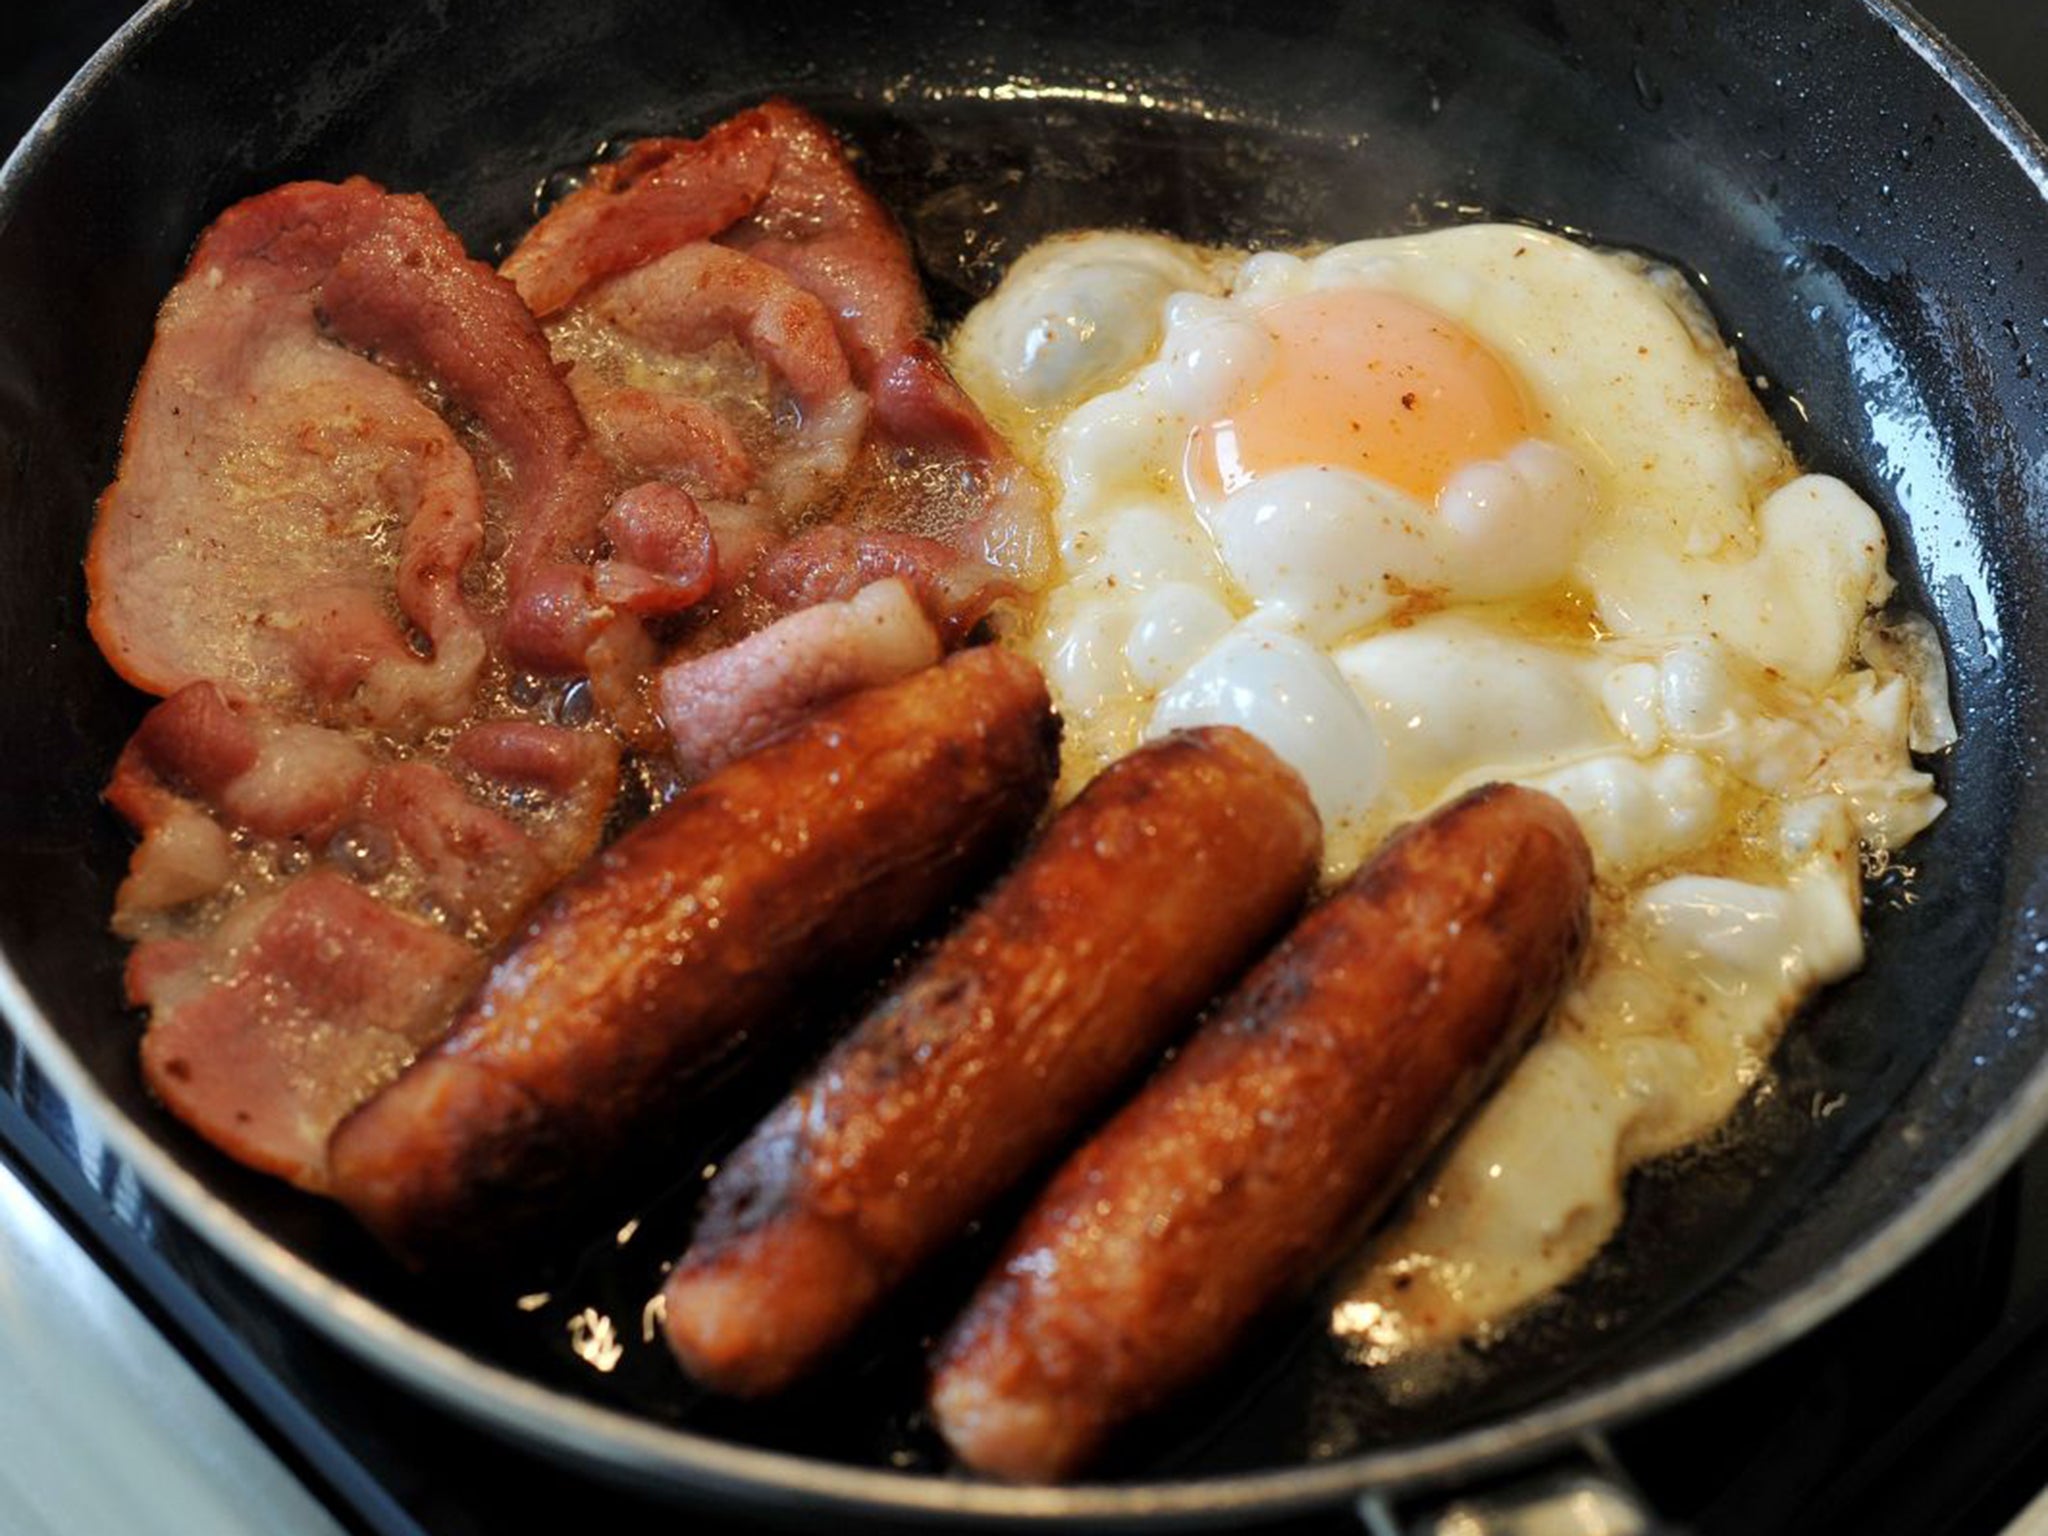 25 classic British foods that foreigners find gross | The Independent | The  Independent